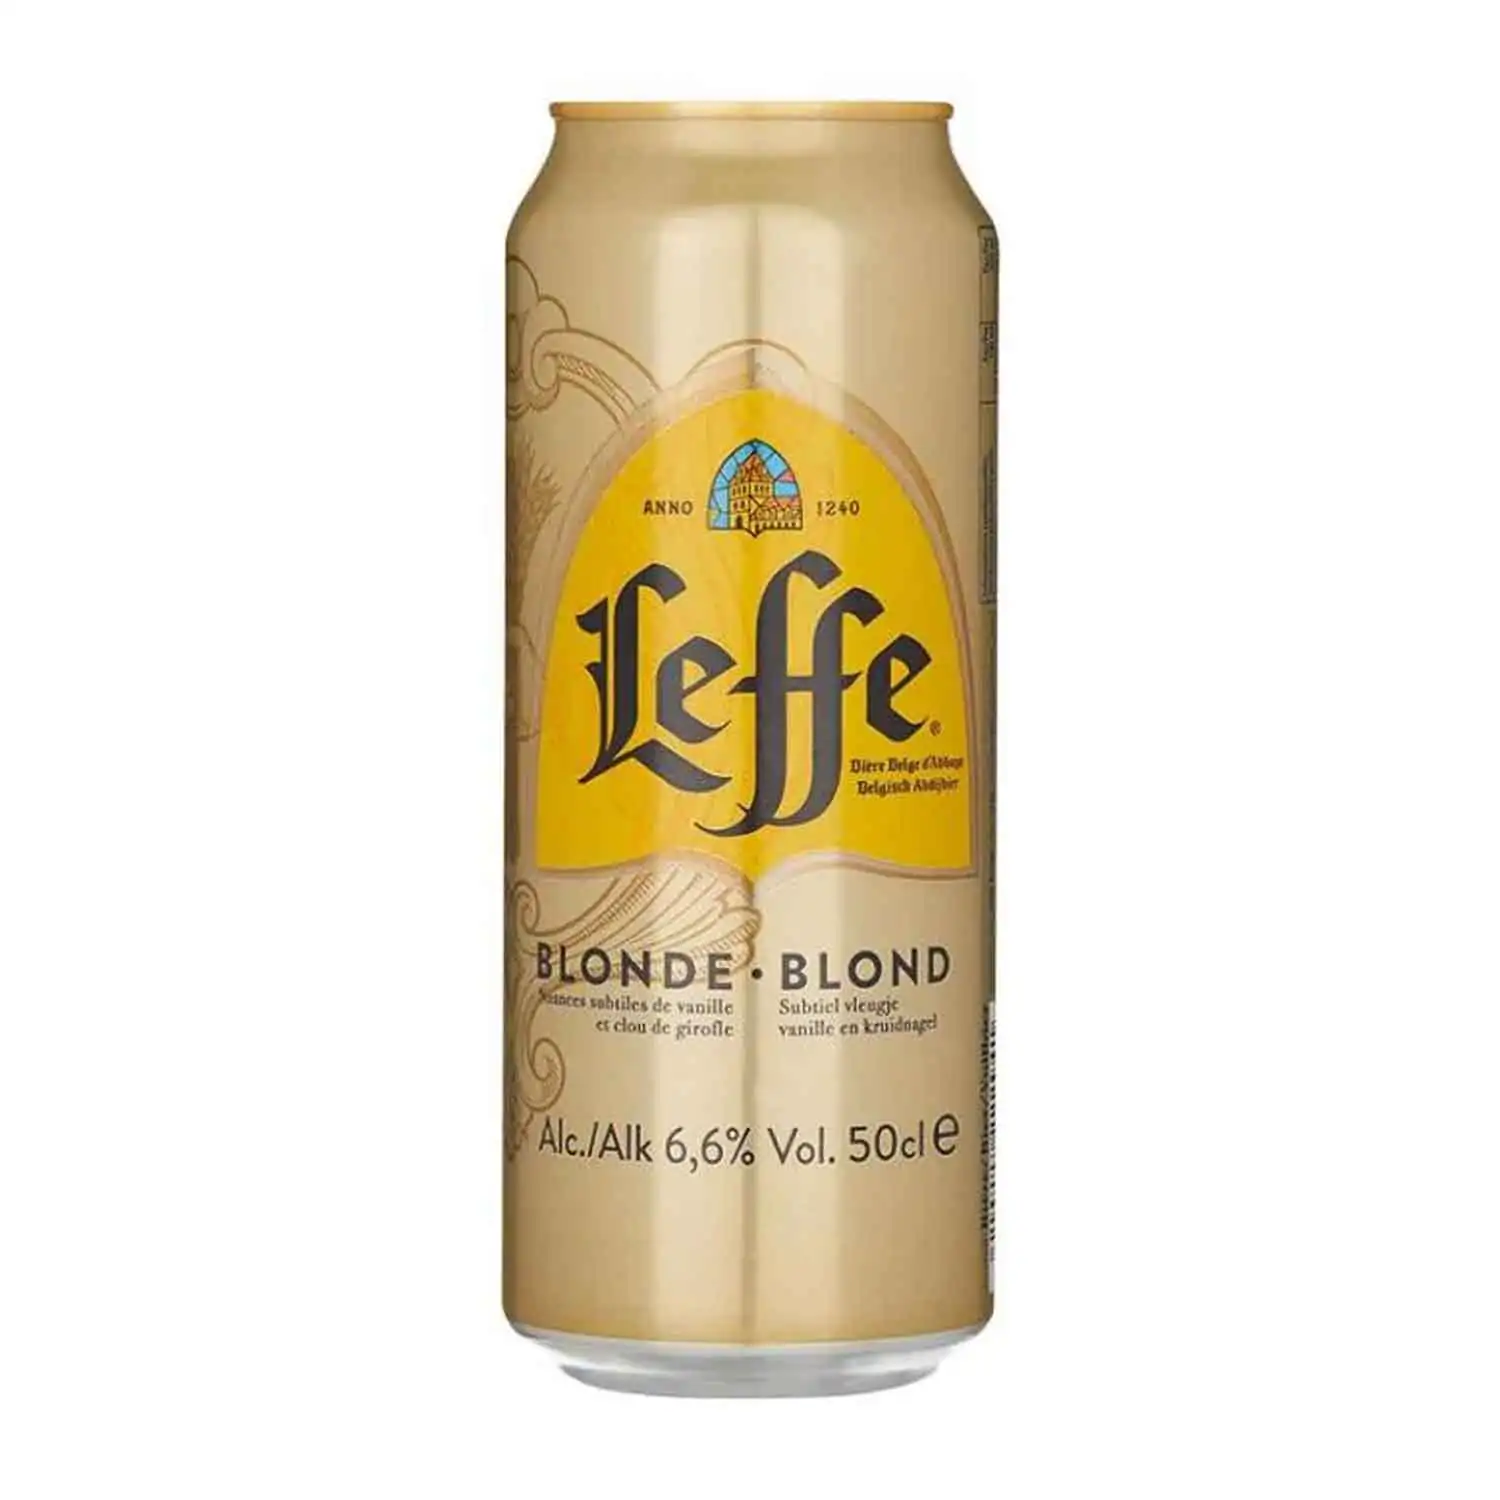 Leffe blonde 50cl Alc 6,6% - Buy at Real Tobacco